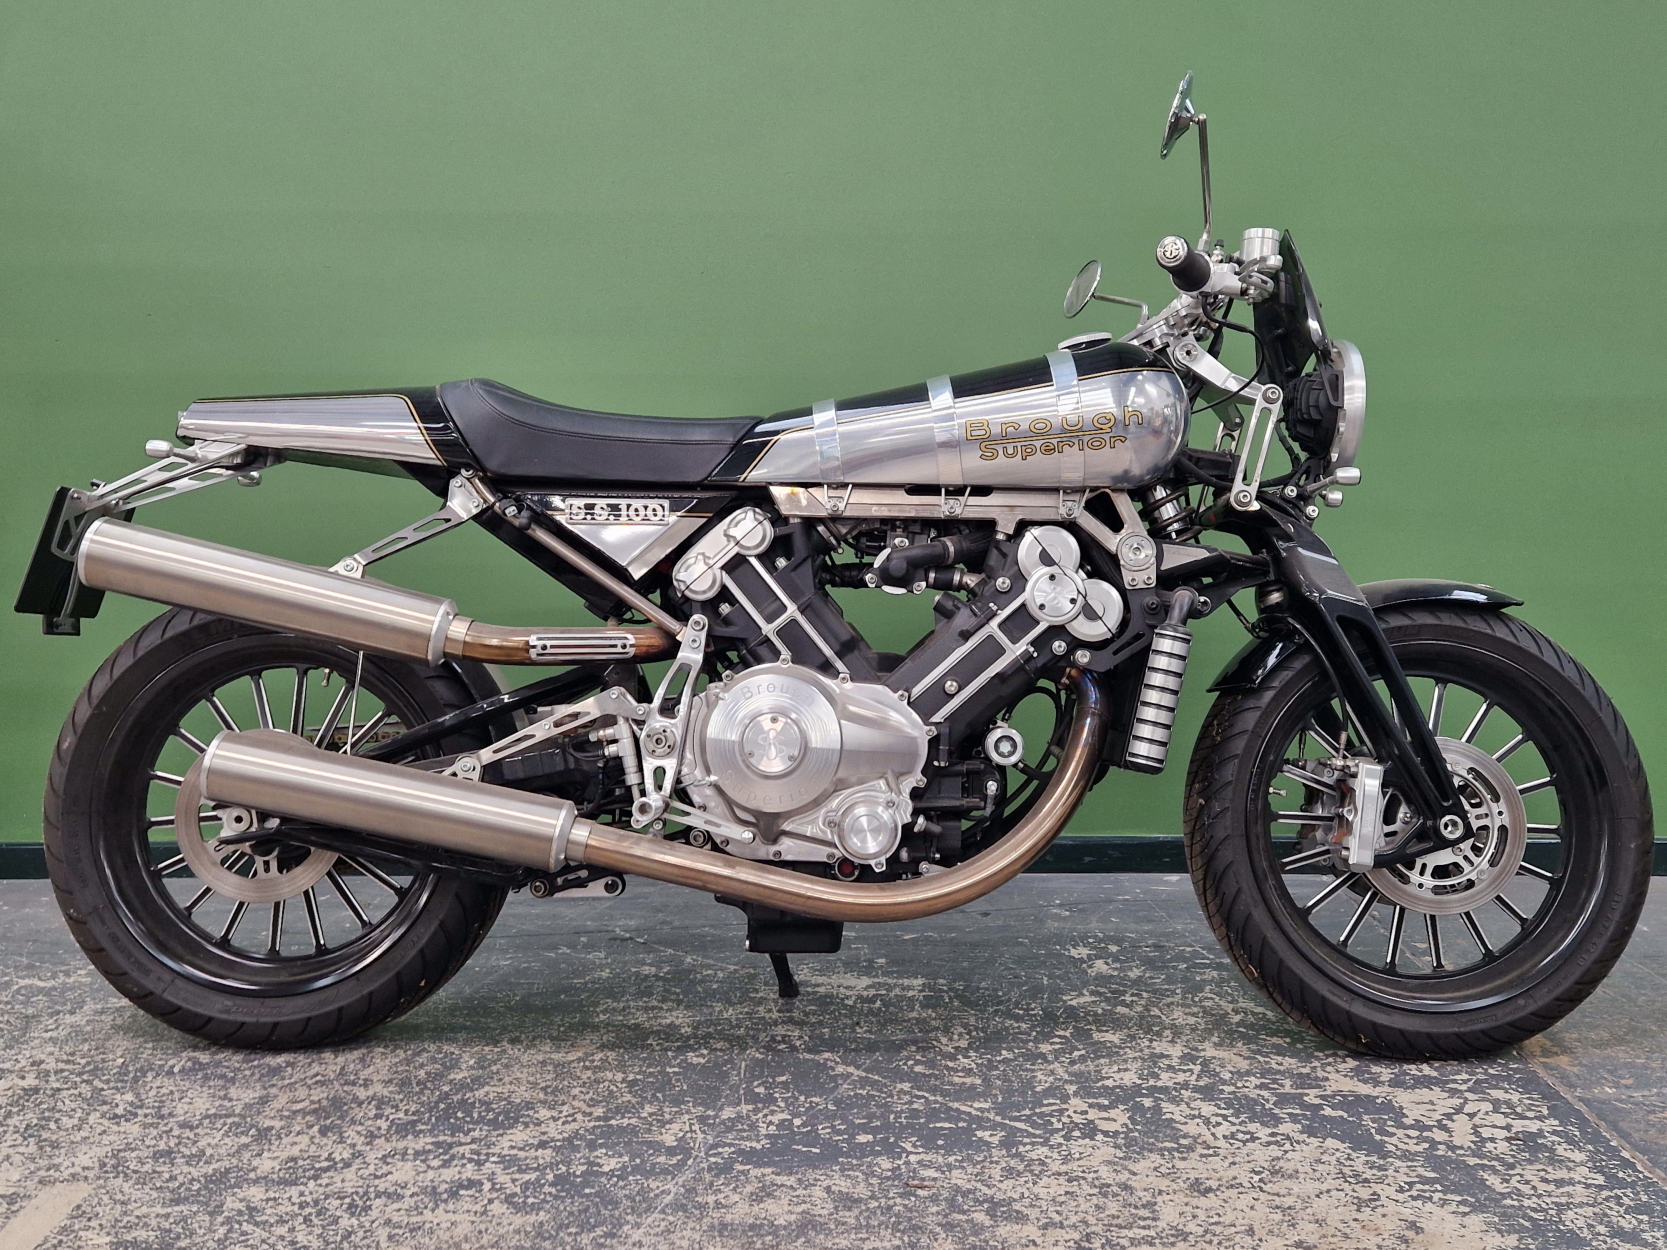 BROUGH SUPERIOR SS100 LTD EDITION- 1000CC REGISTRATION NUMBER WK67ASX- LTD. EDITION NUMBER 41 OF A